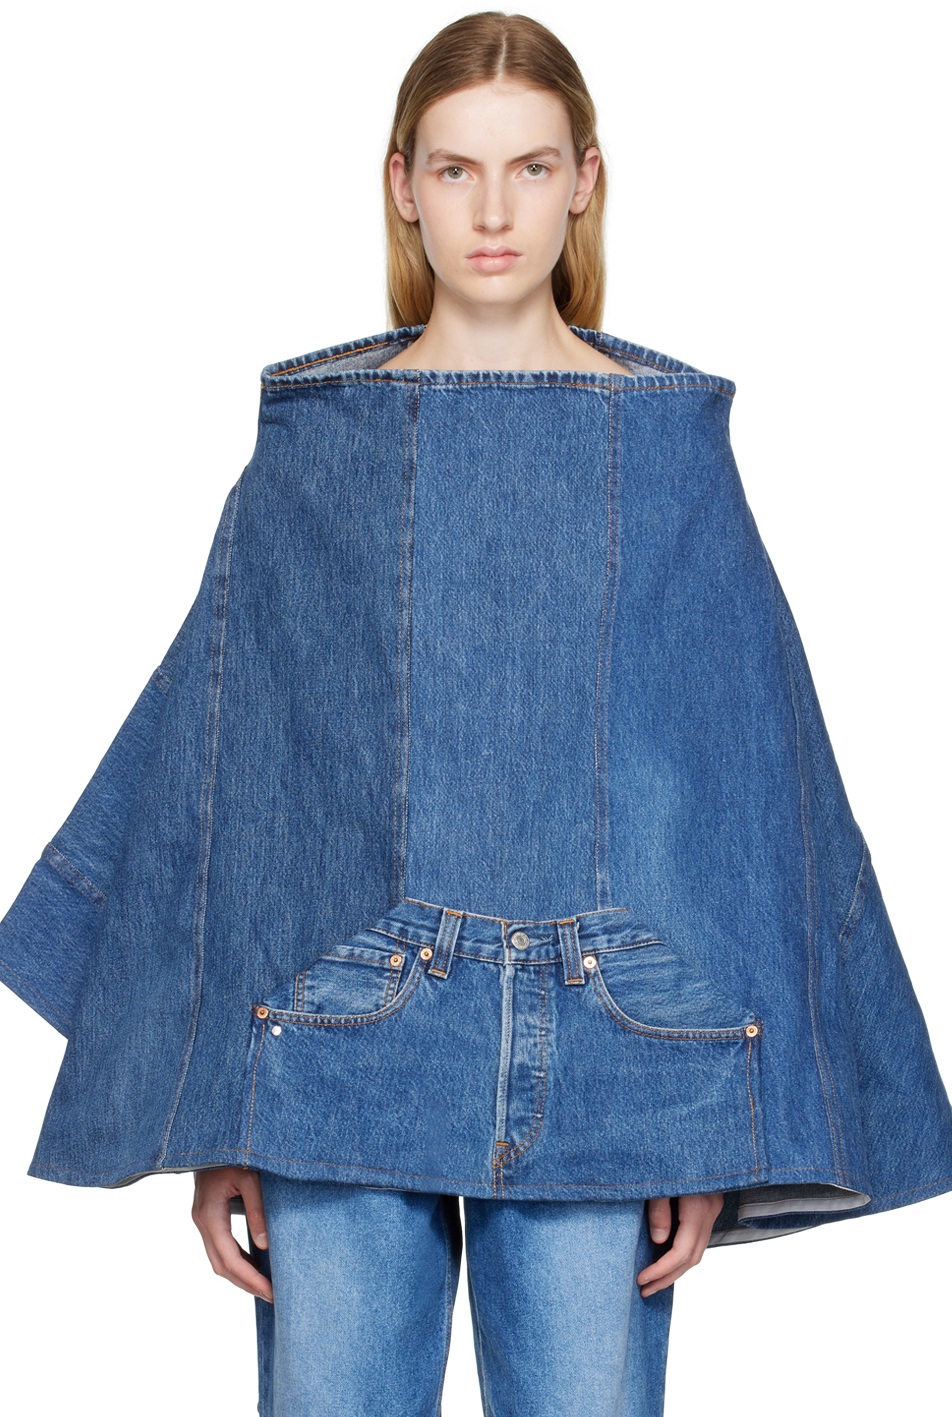 Poncho-Style Denim Jacket by Bless on Sale